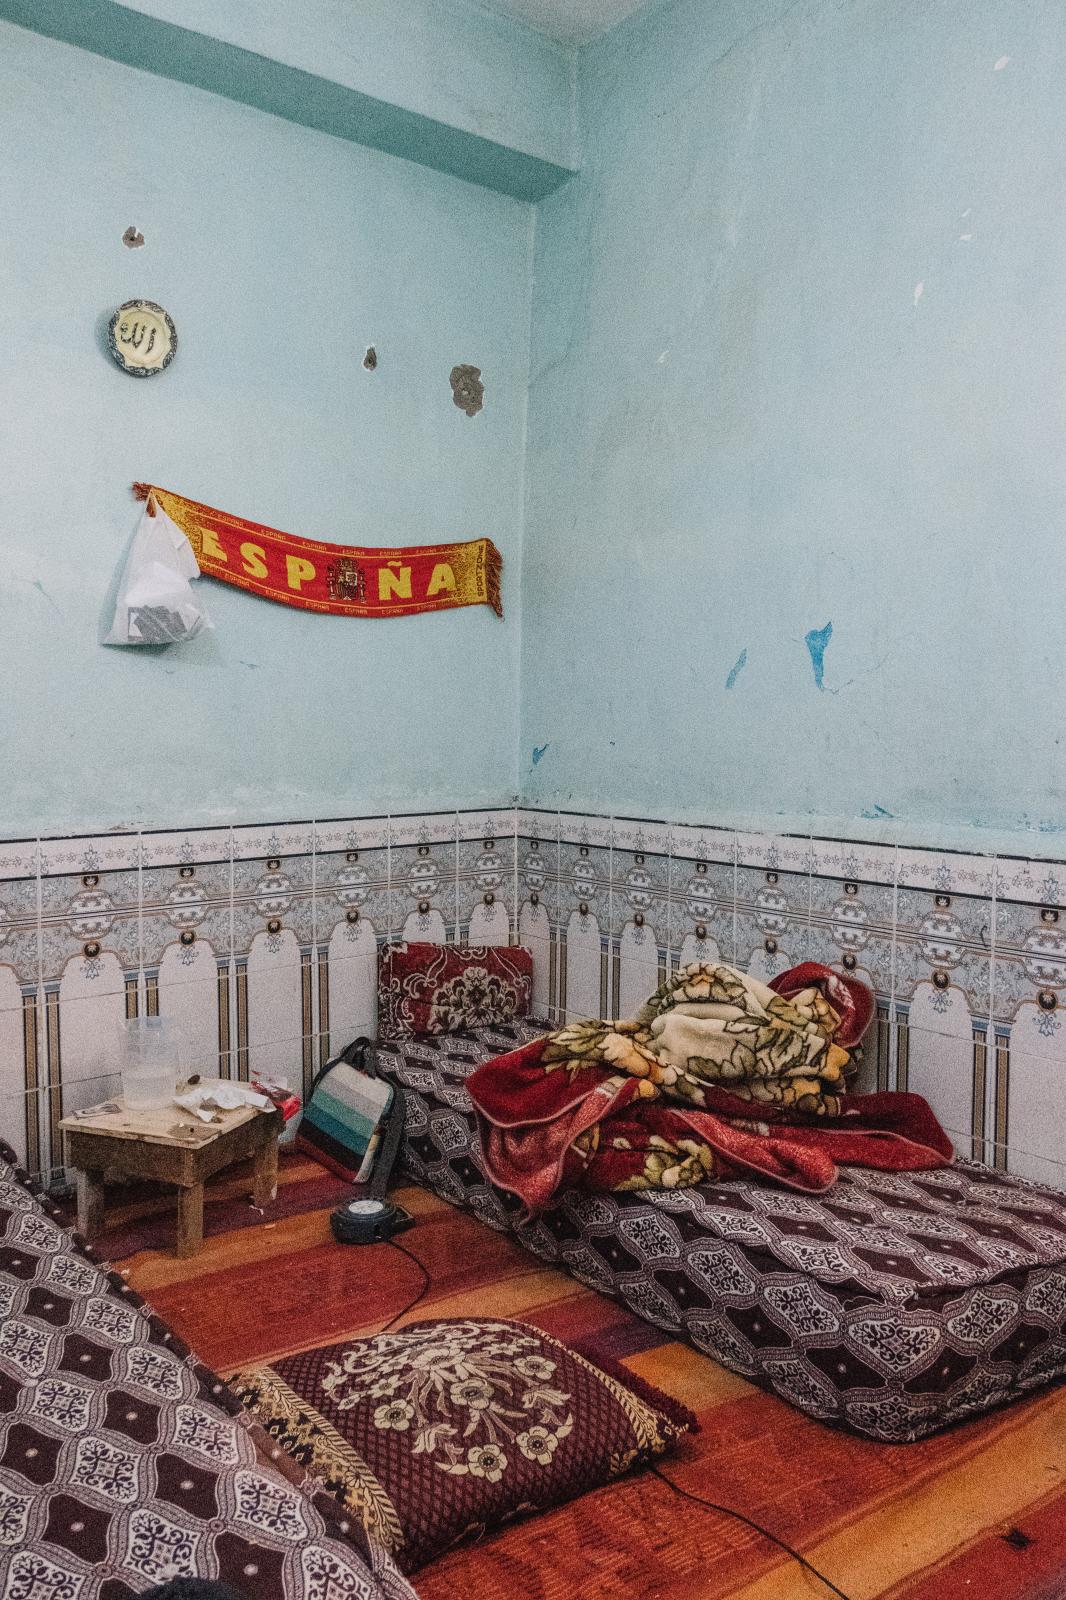 Rural youth  - Slama's brother's room with a banner with...